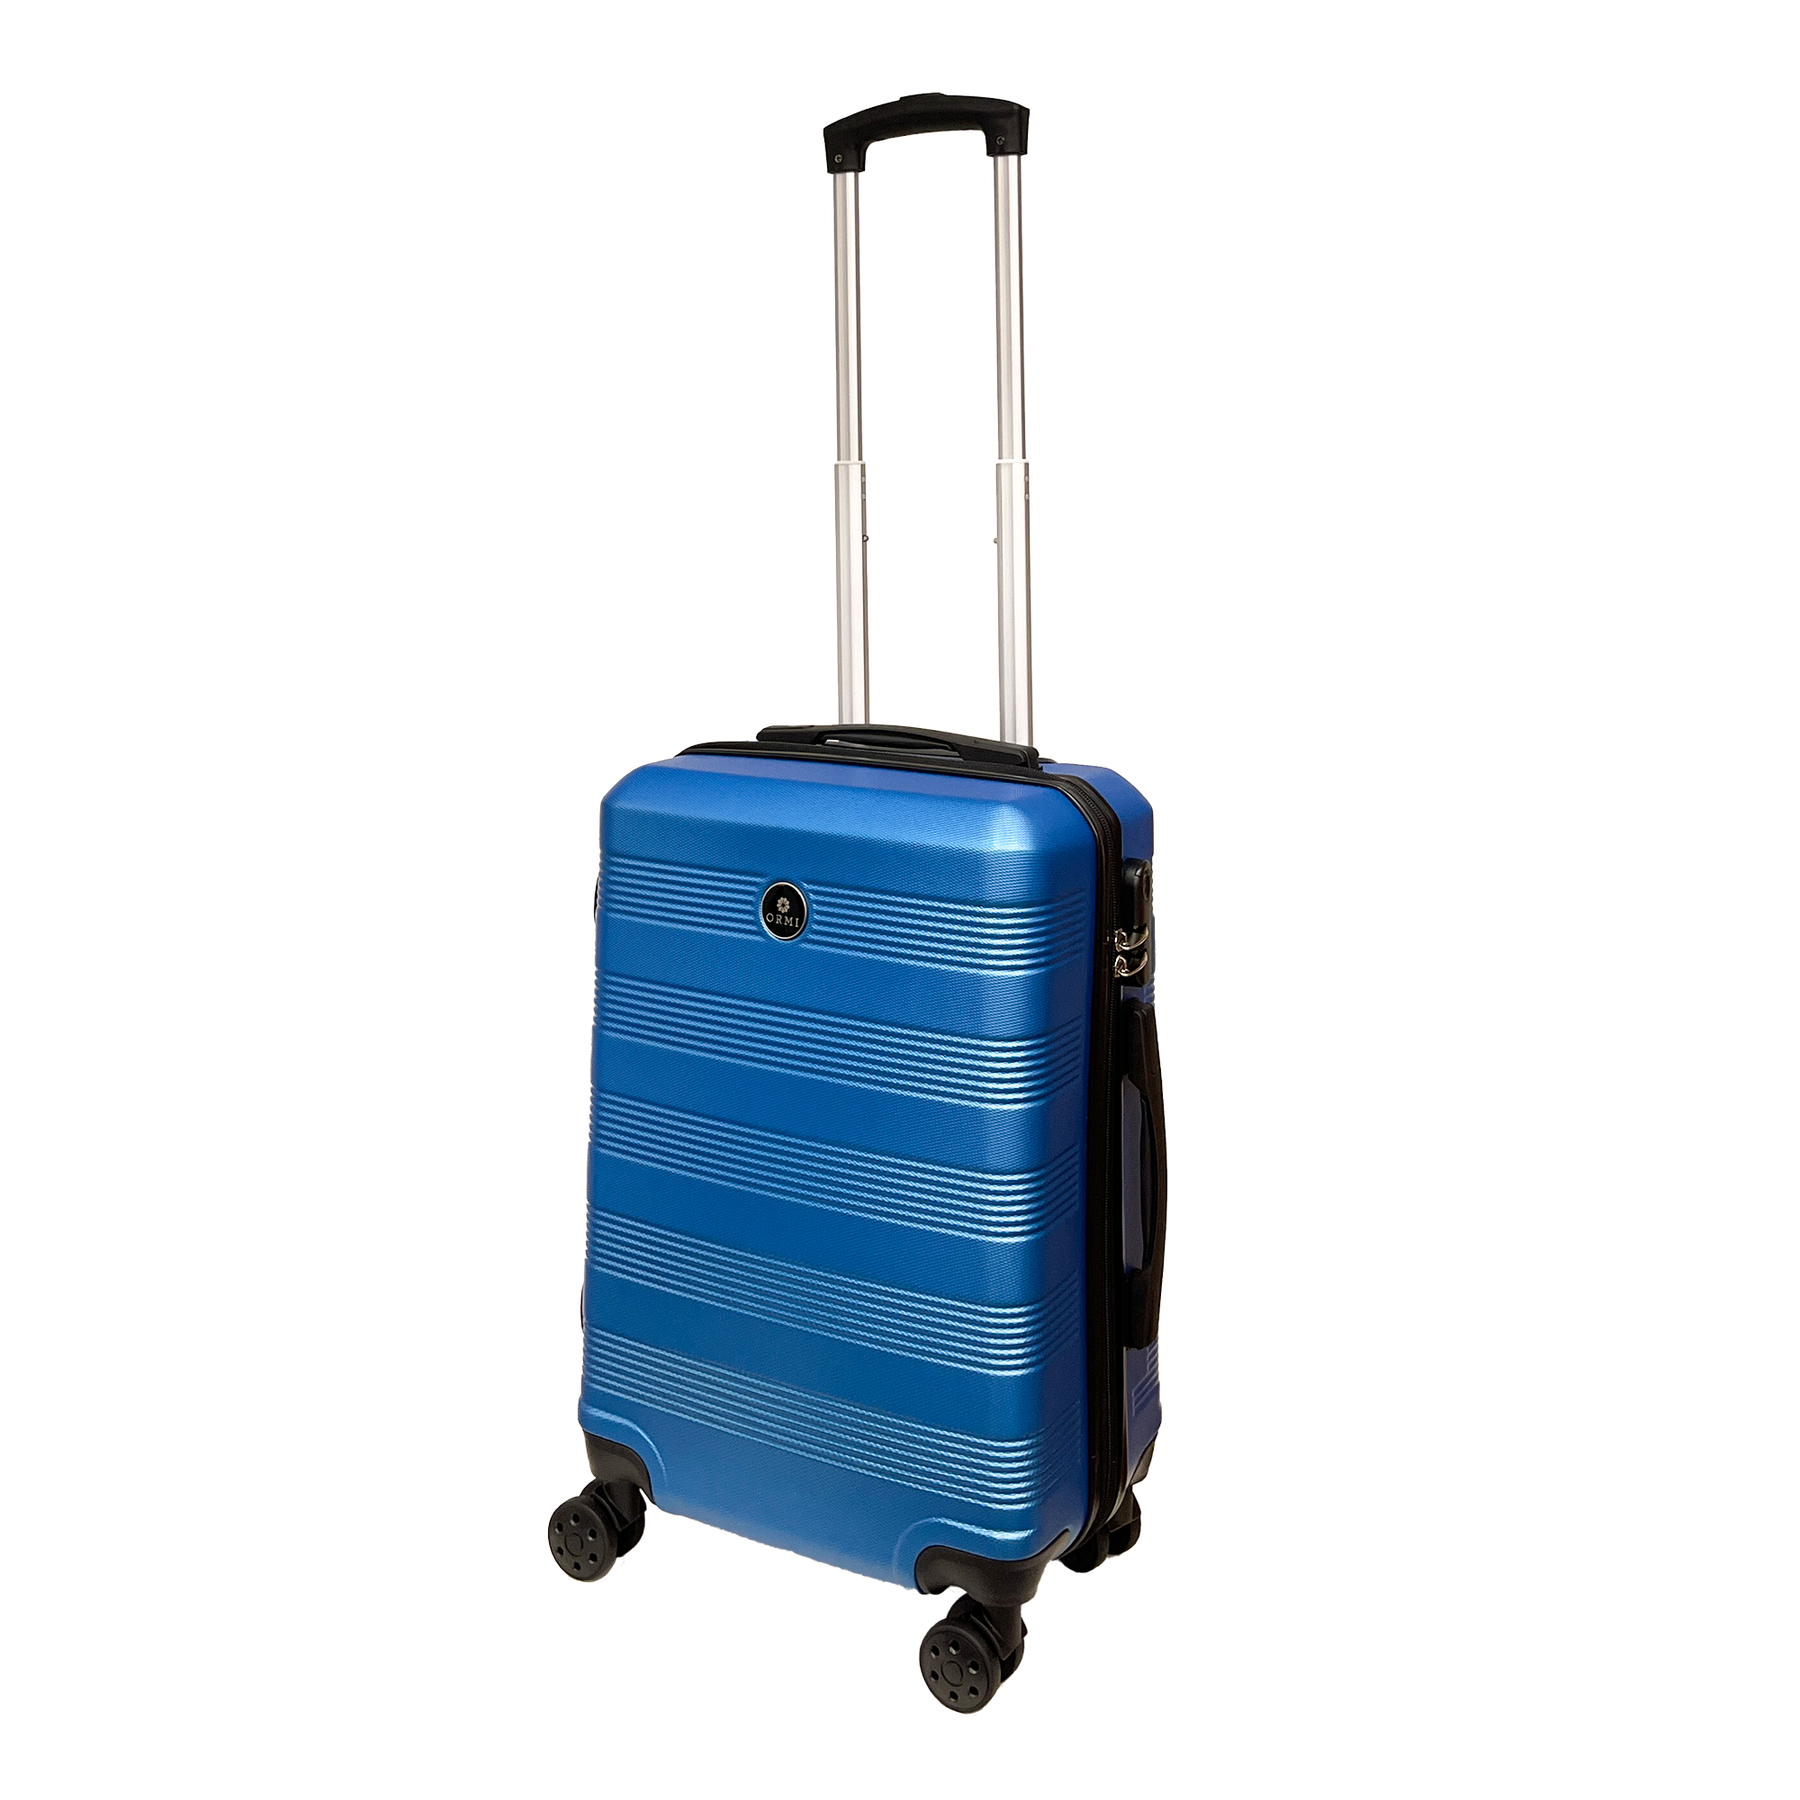 Ormi Tenwave Large Carry-On Trolley Luggage 55x40x22.5 cm: Ultra Lightweight and High-Quality Unisex